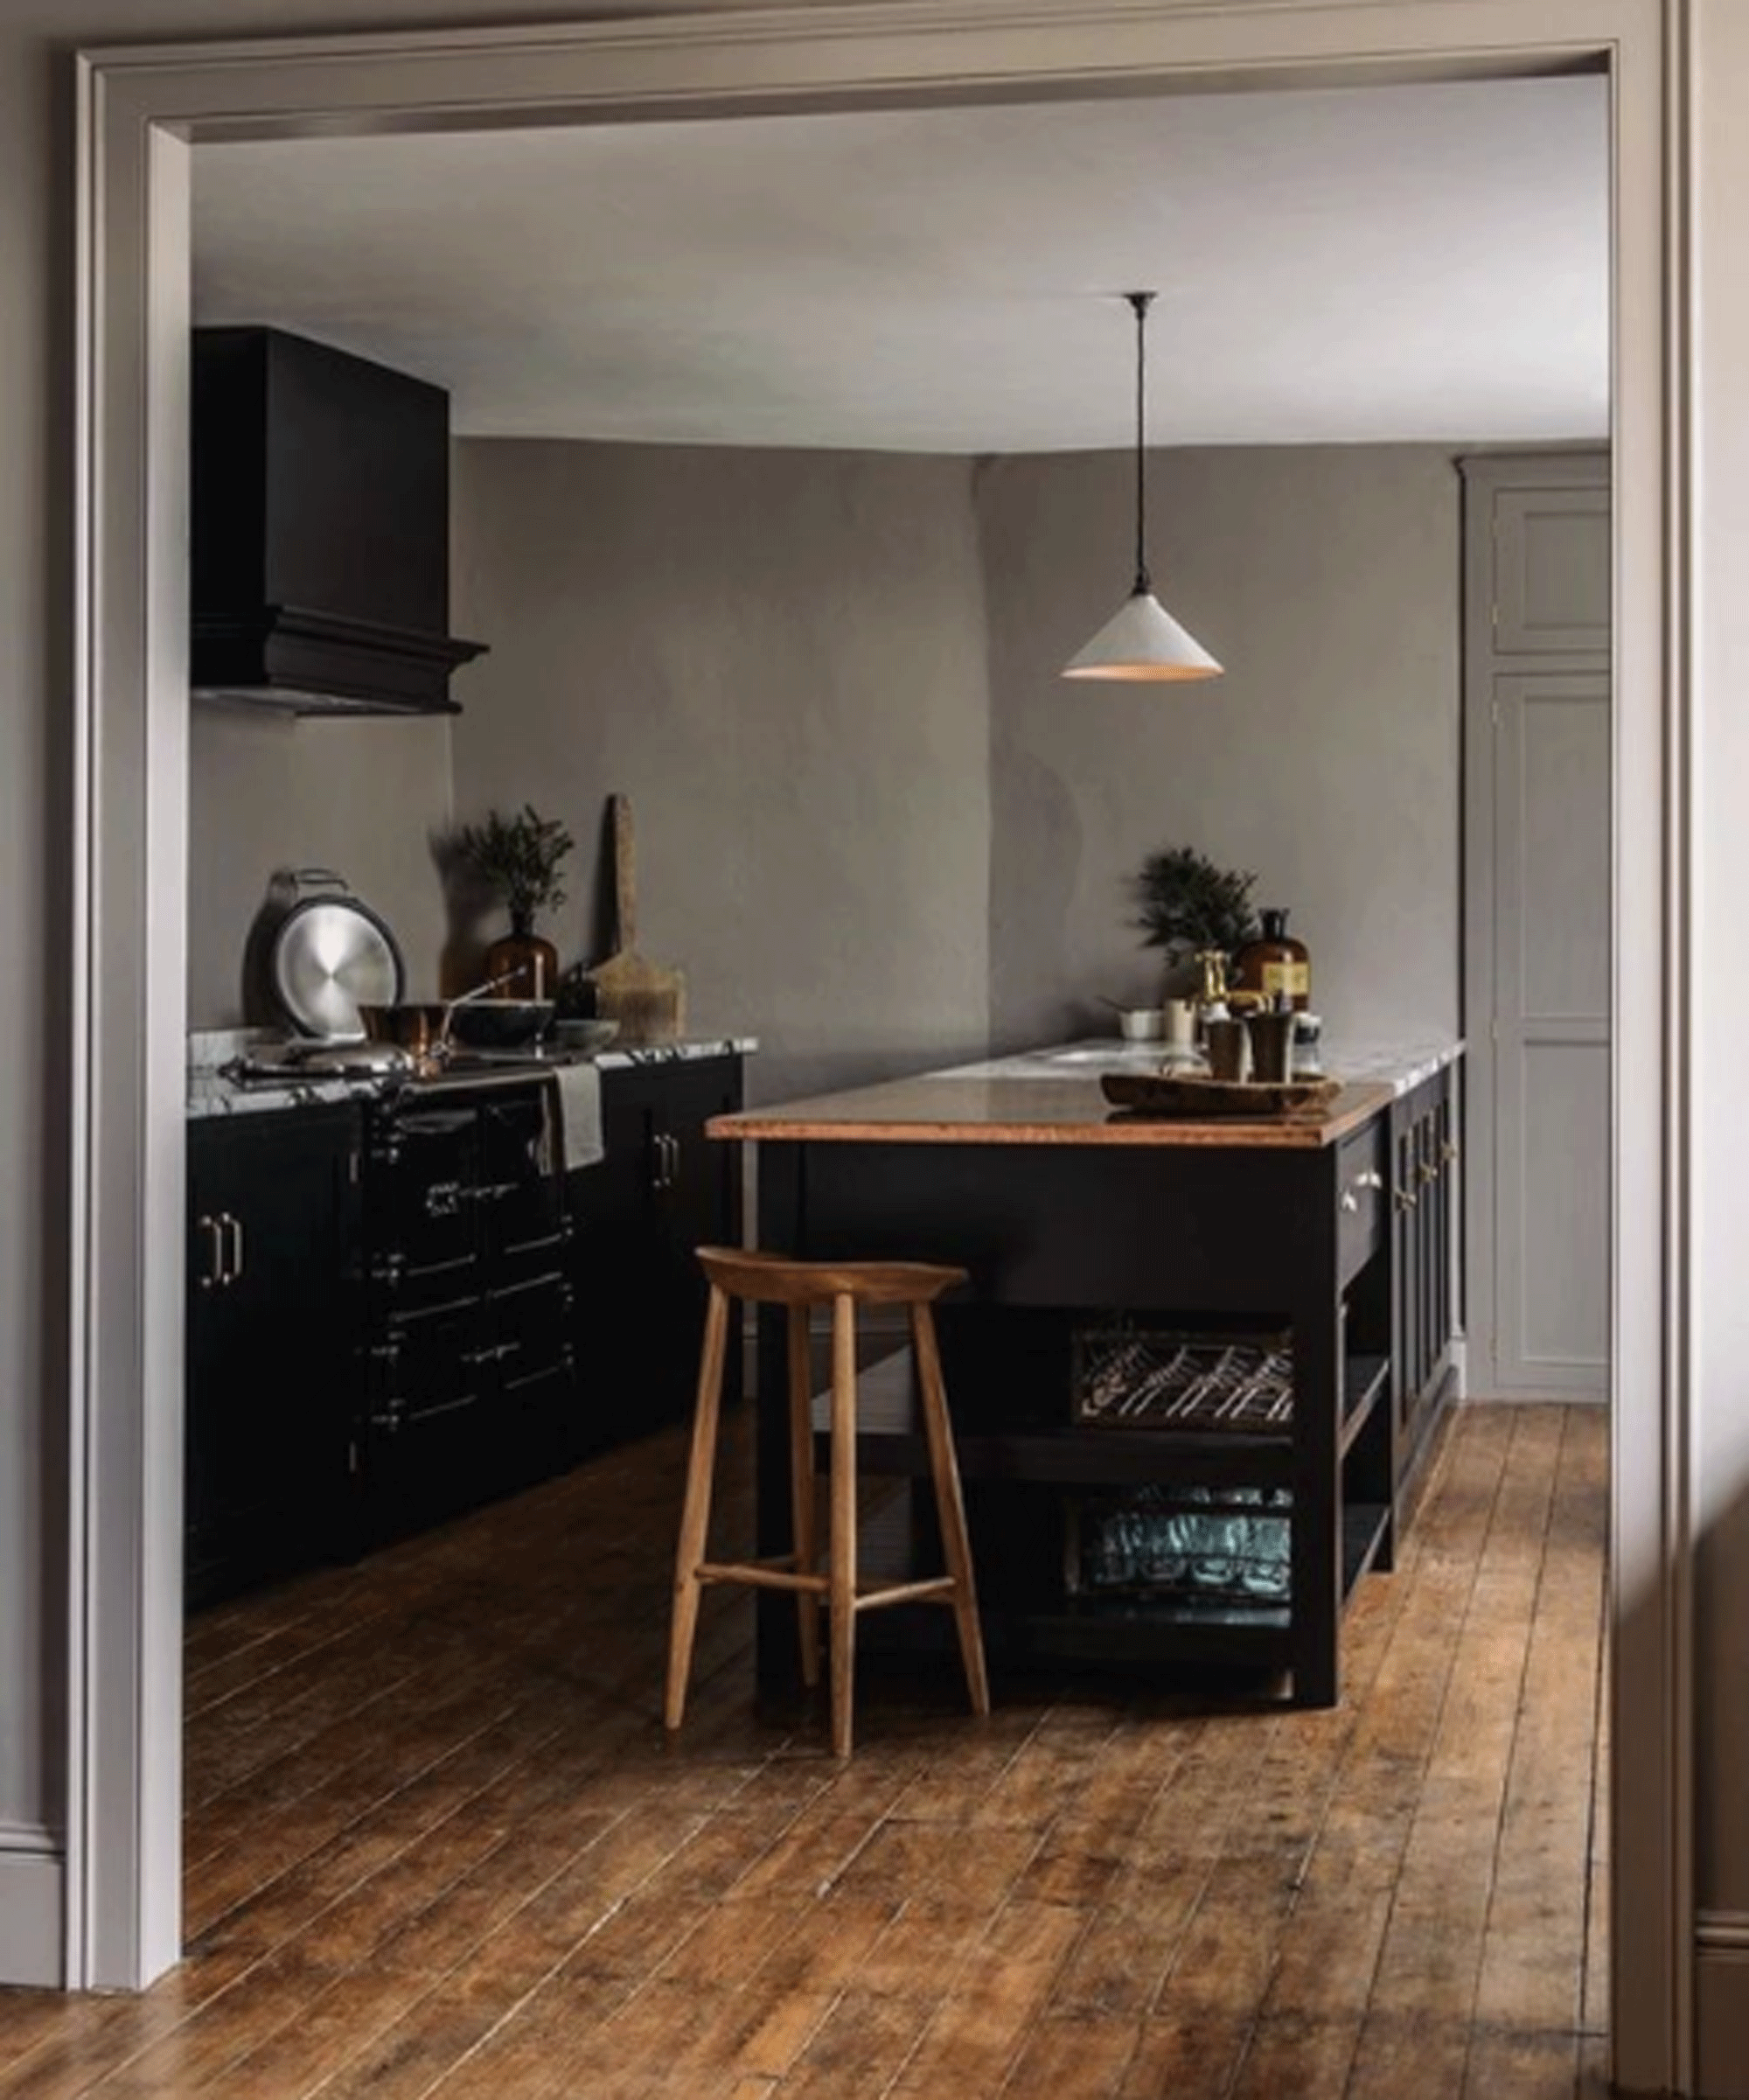 Black kitchen with wooden flooring and grey walls